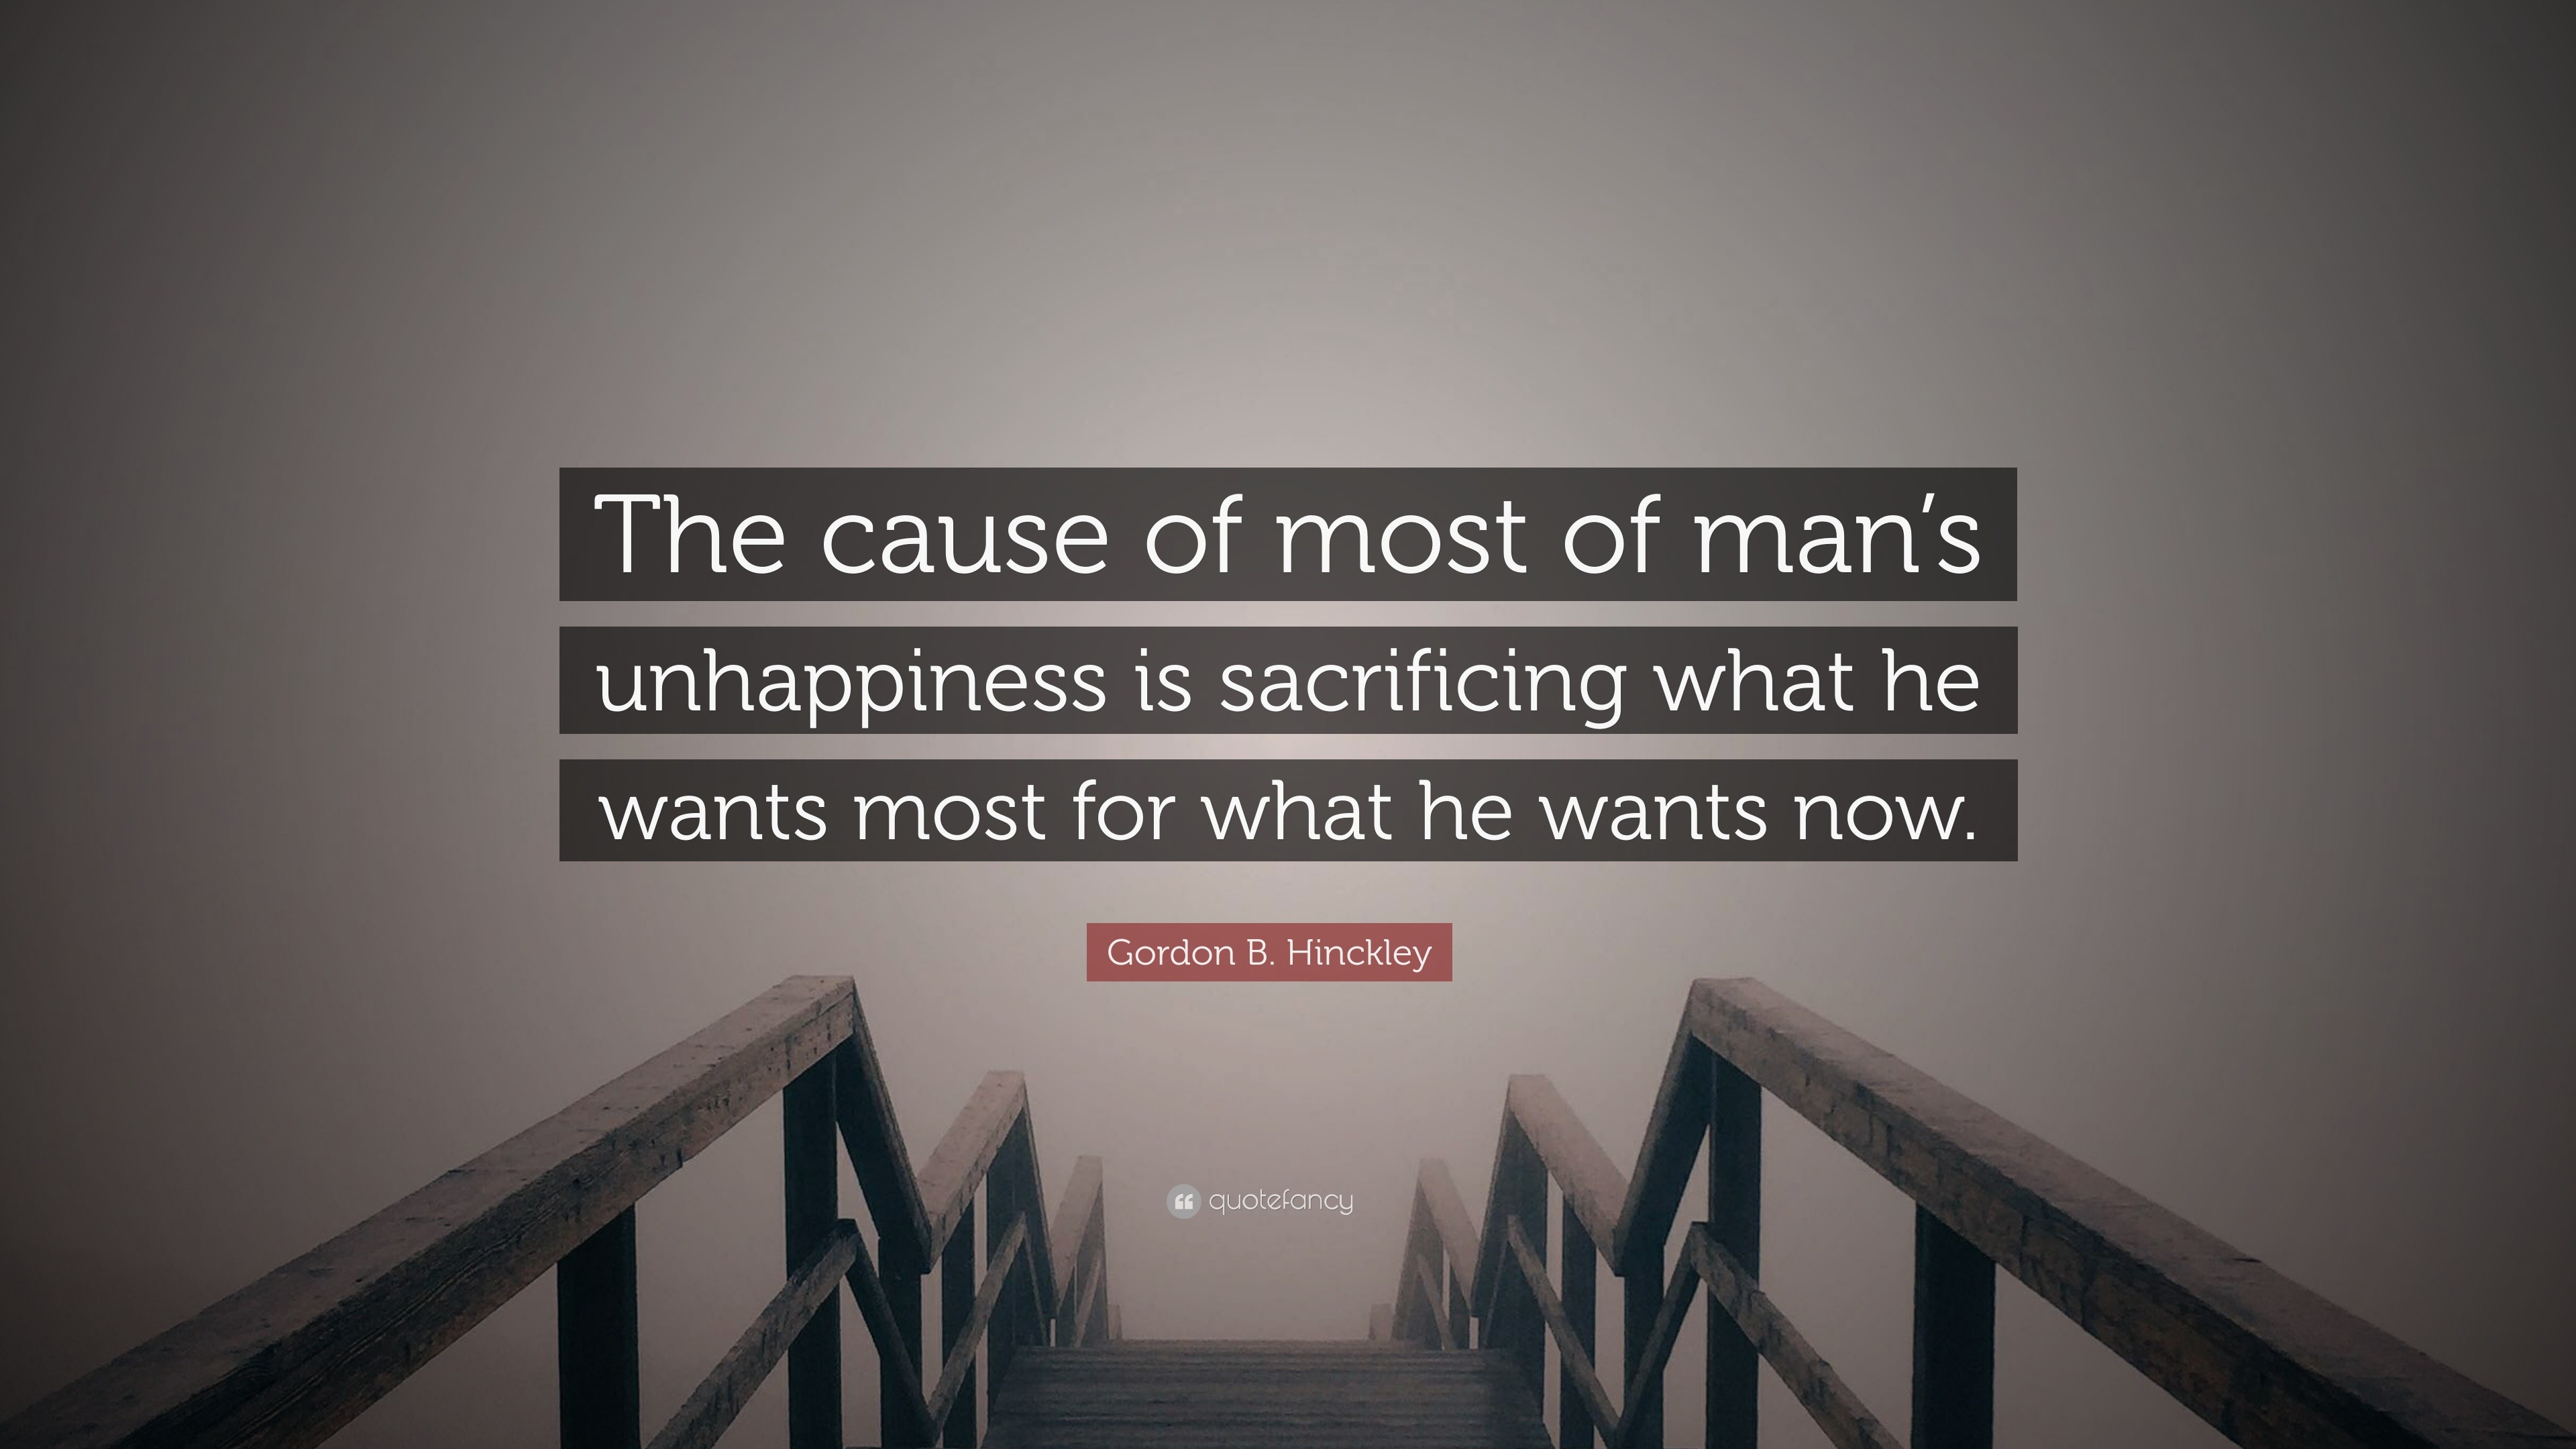 Gordon B Hinckley Quote “the Cause Of Most Of Man S Unhappiness Is Sacrificing What He Wants